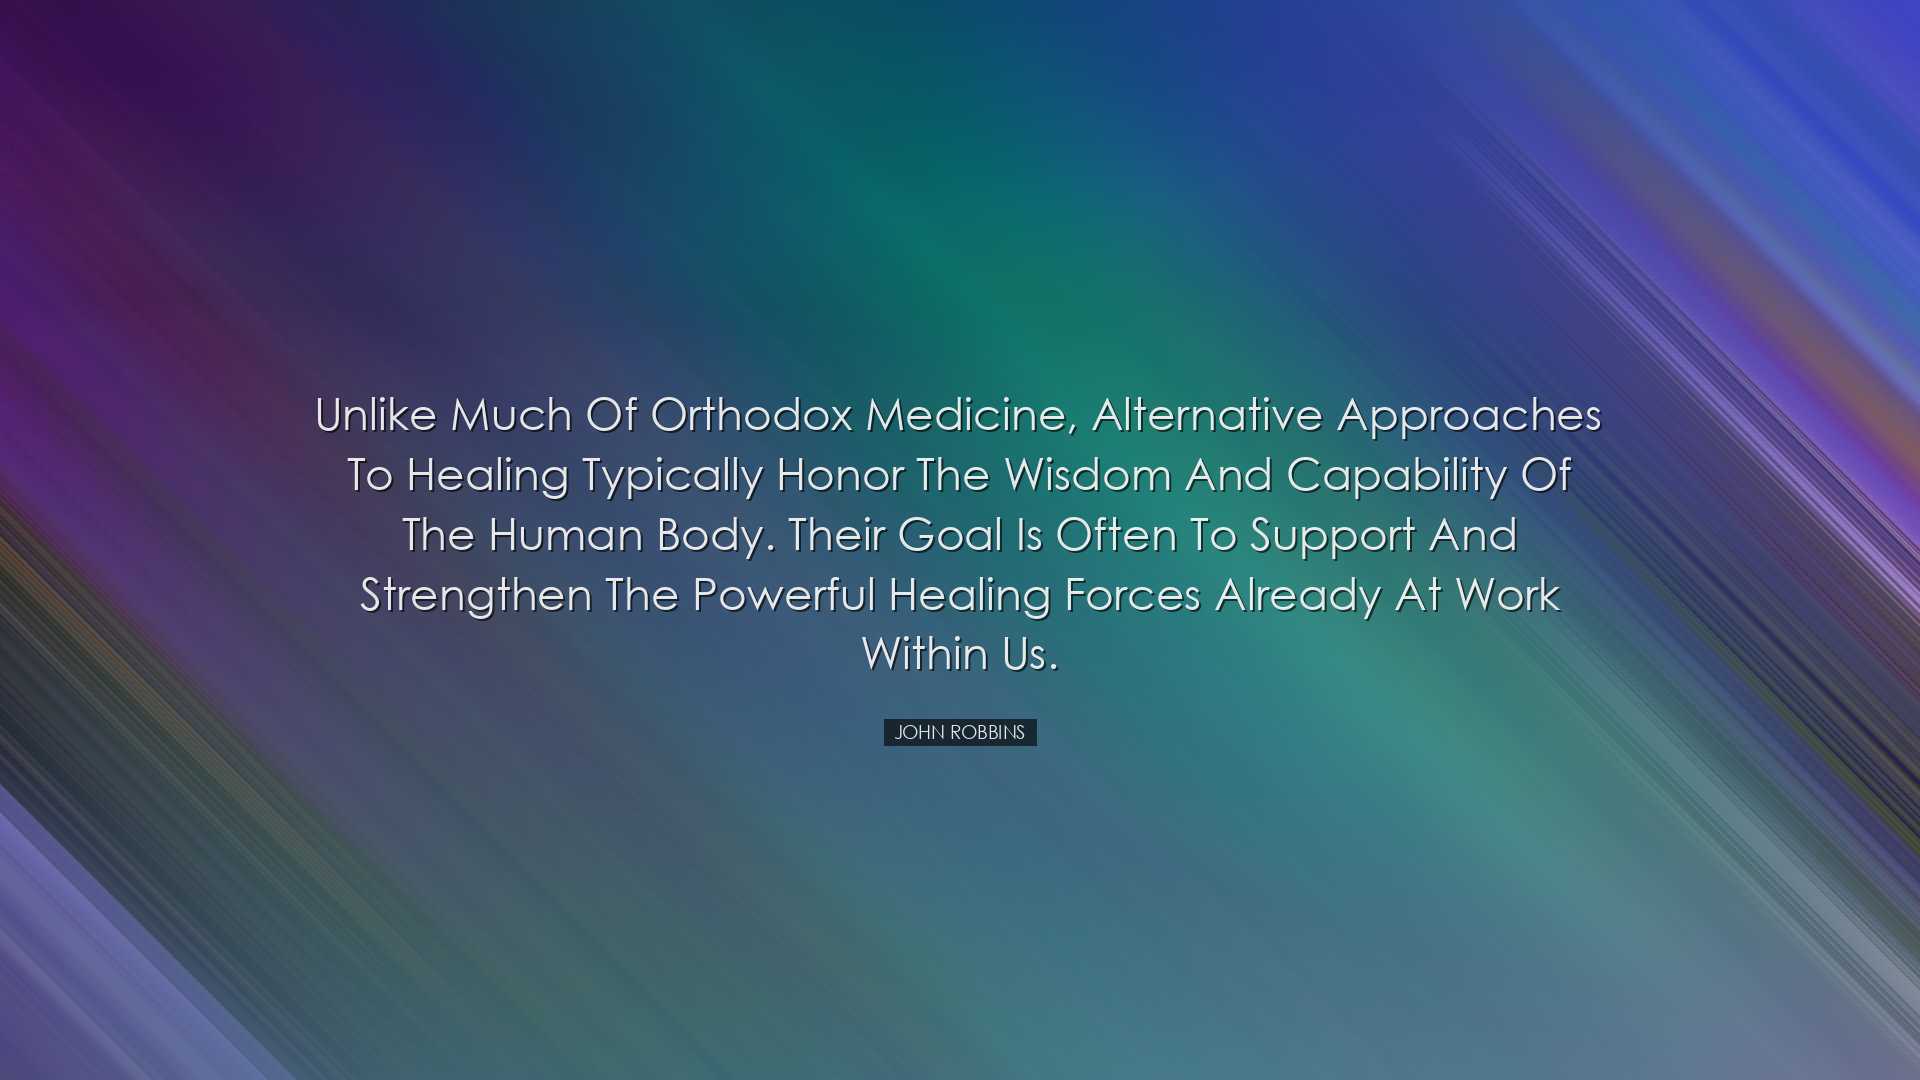 Unlike much of orthodox medicine, alternative approaches to healin